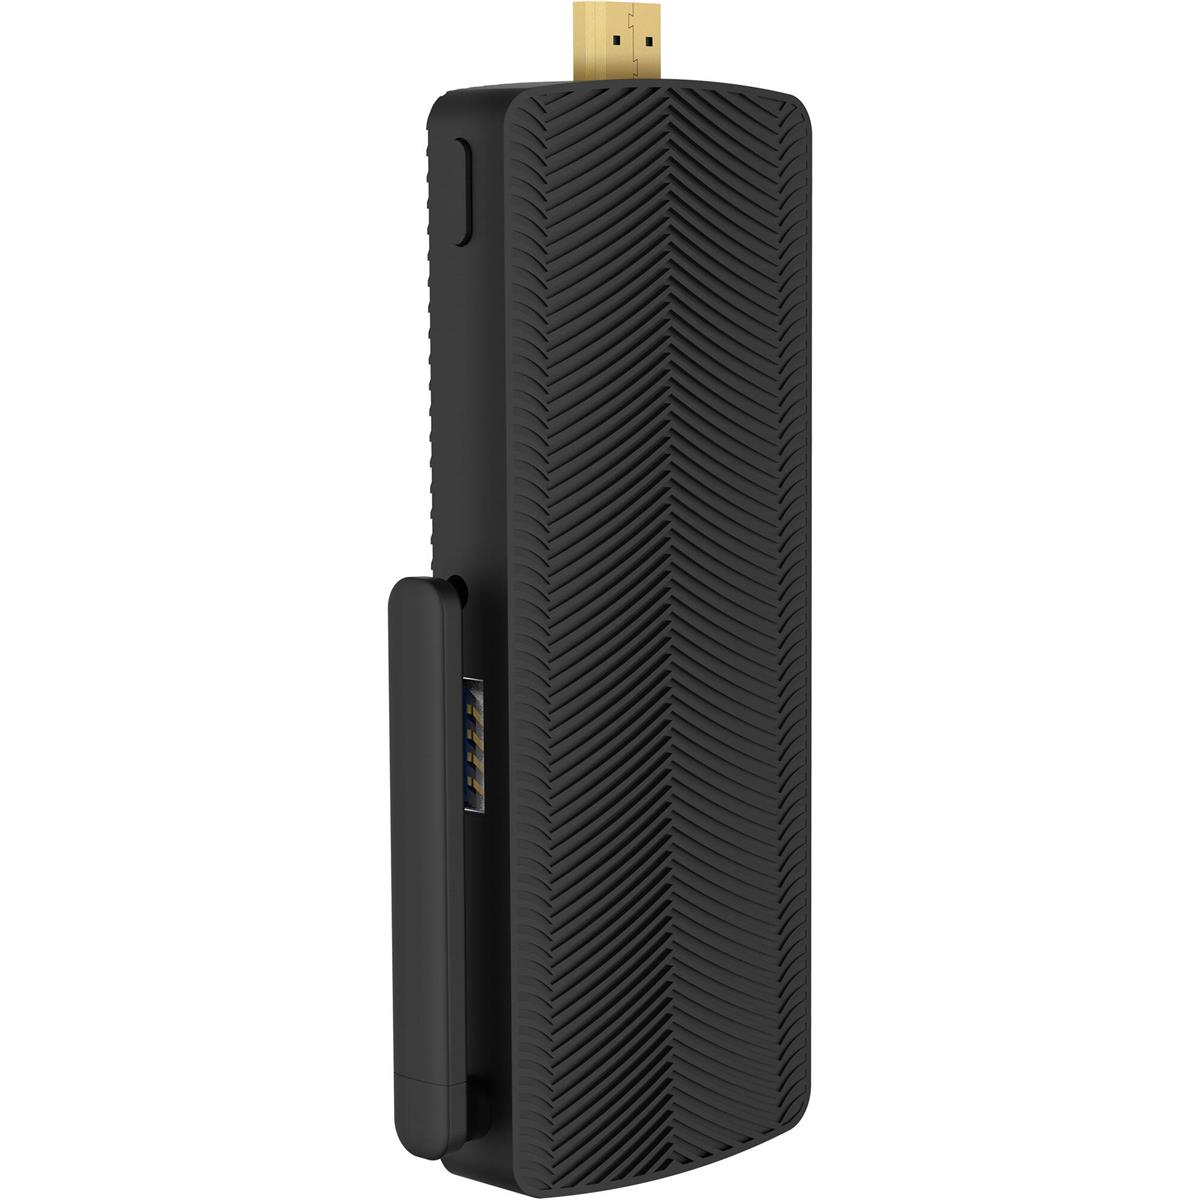 Image of Azulle Access4 Pro Fanless Mini PC Stick with Zoom